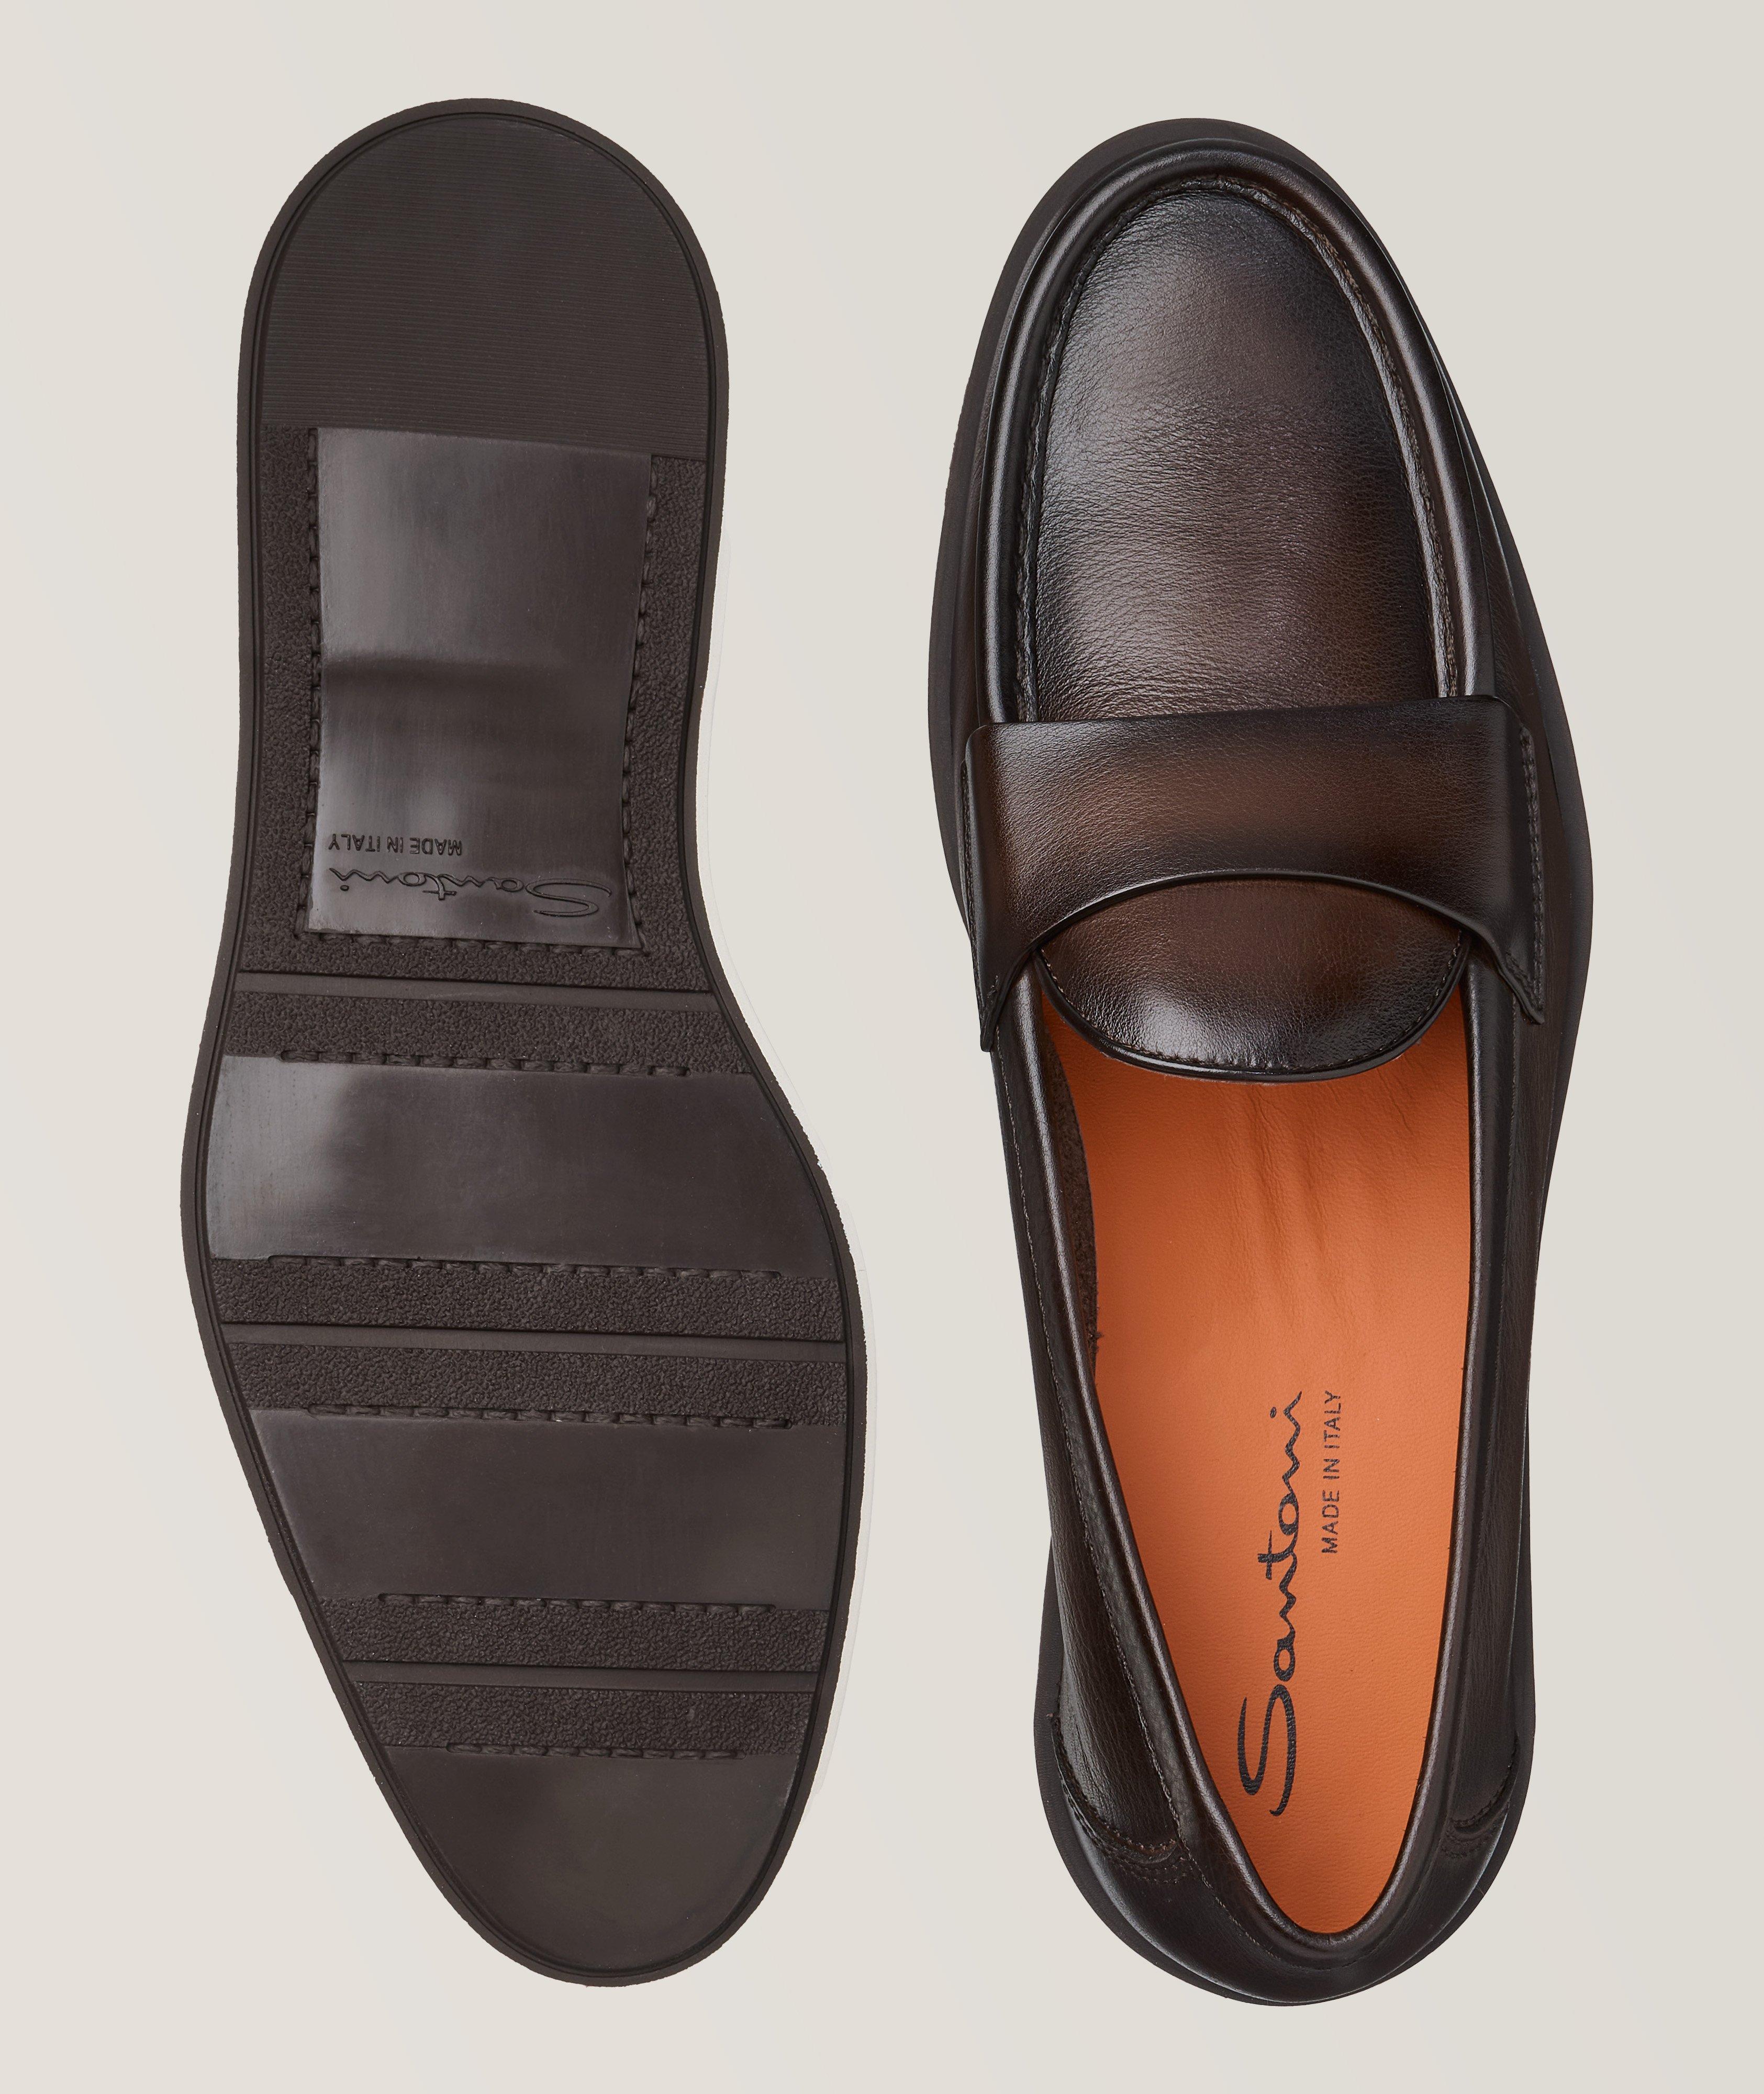 Detroit Burnished Leather Loafers